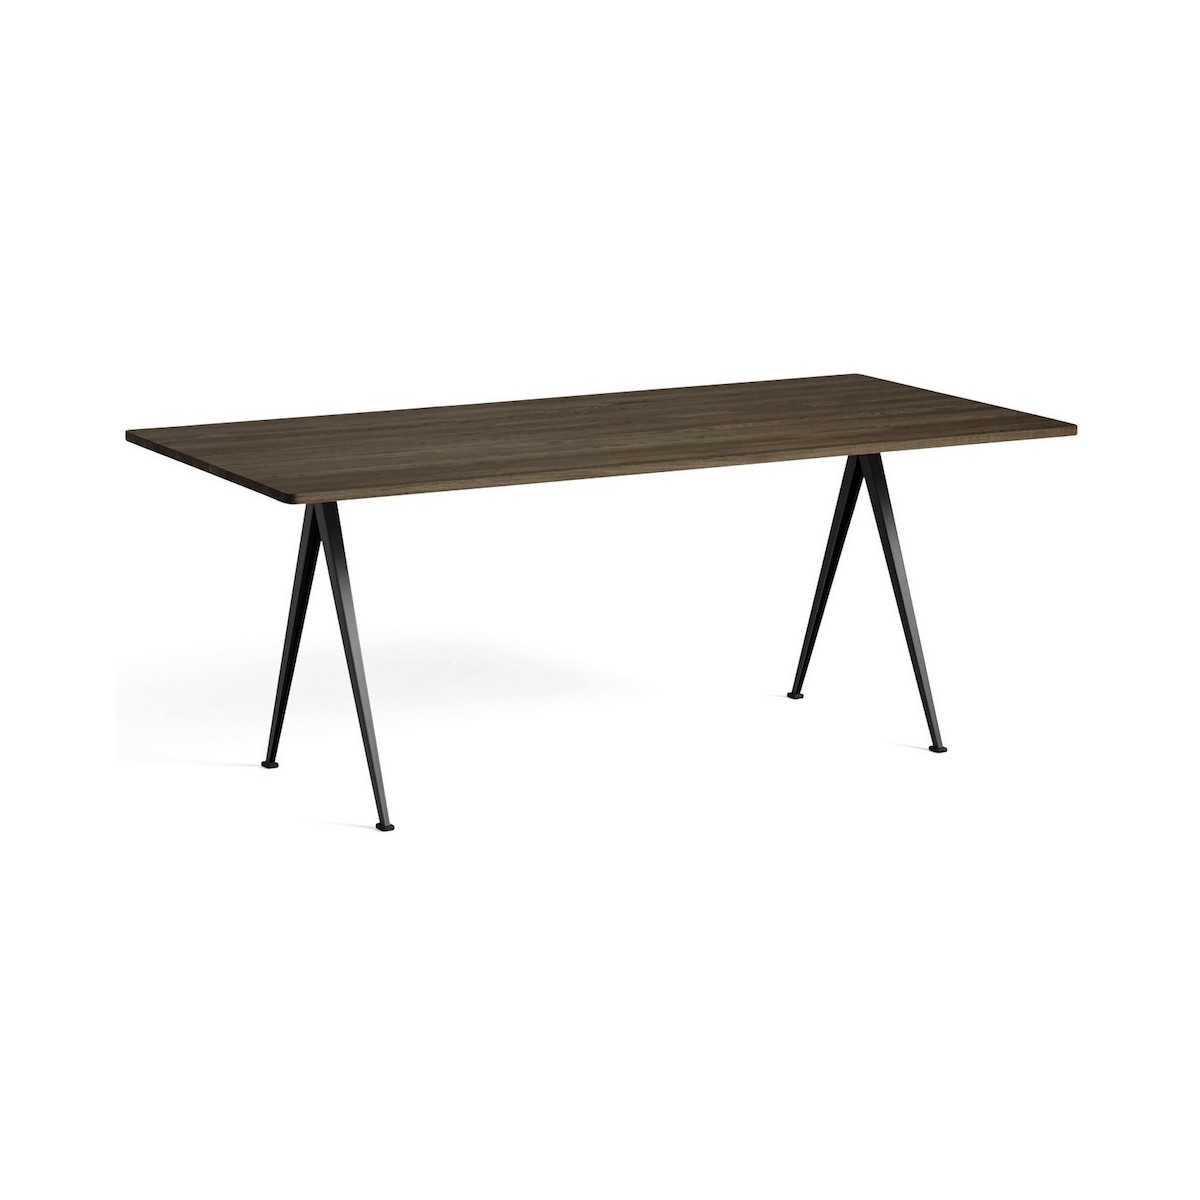 L190 - smoked oiled oak - Pyramid table 2